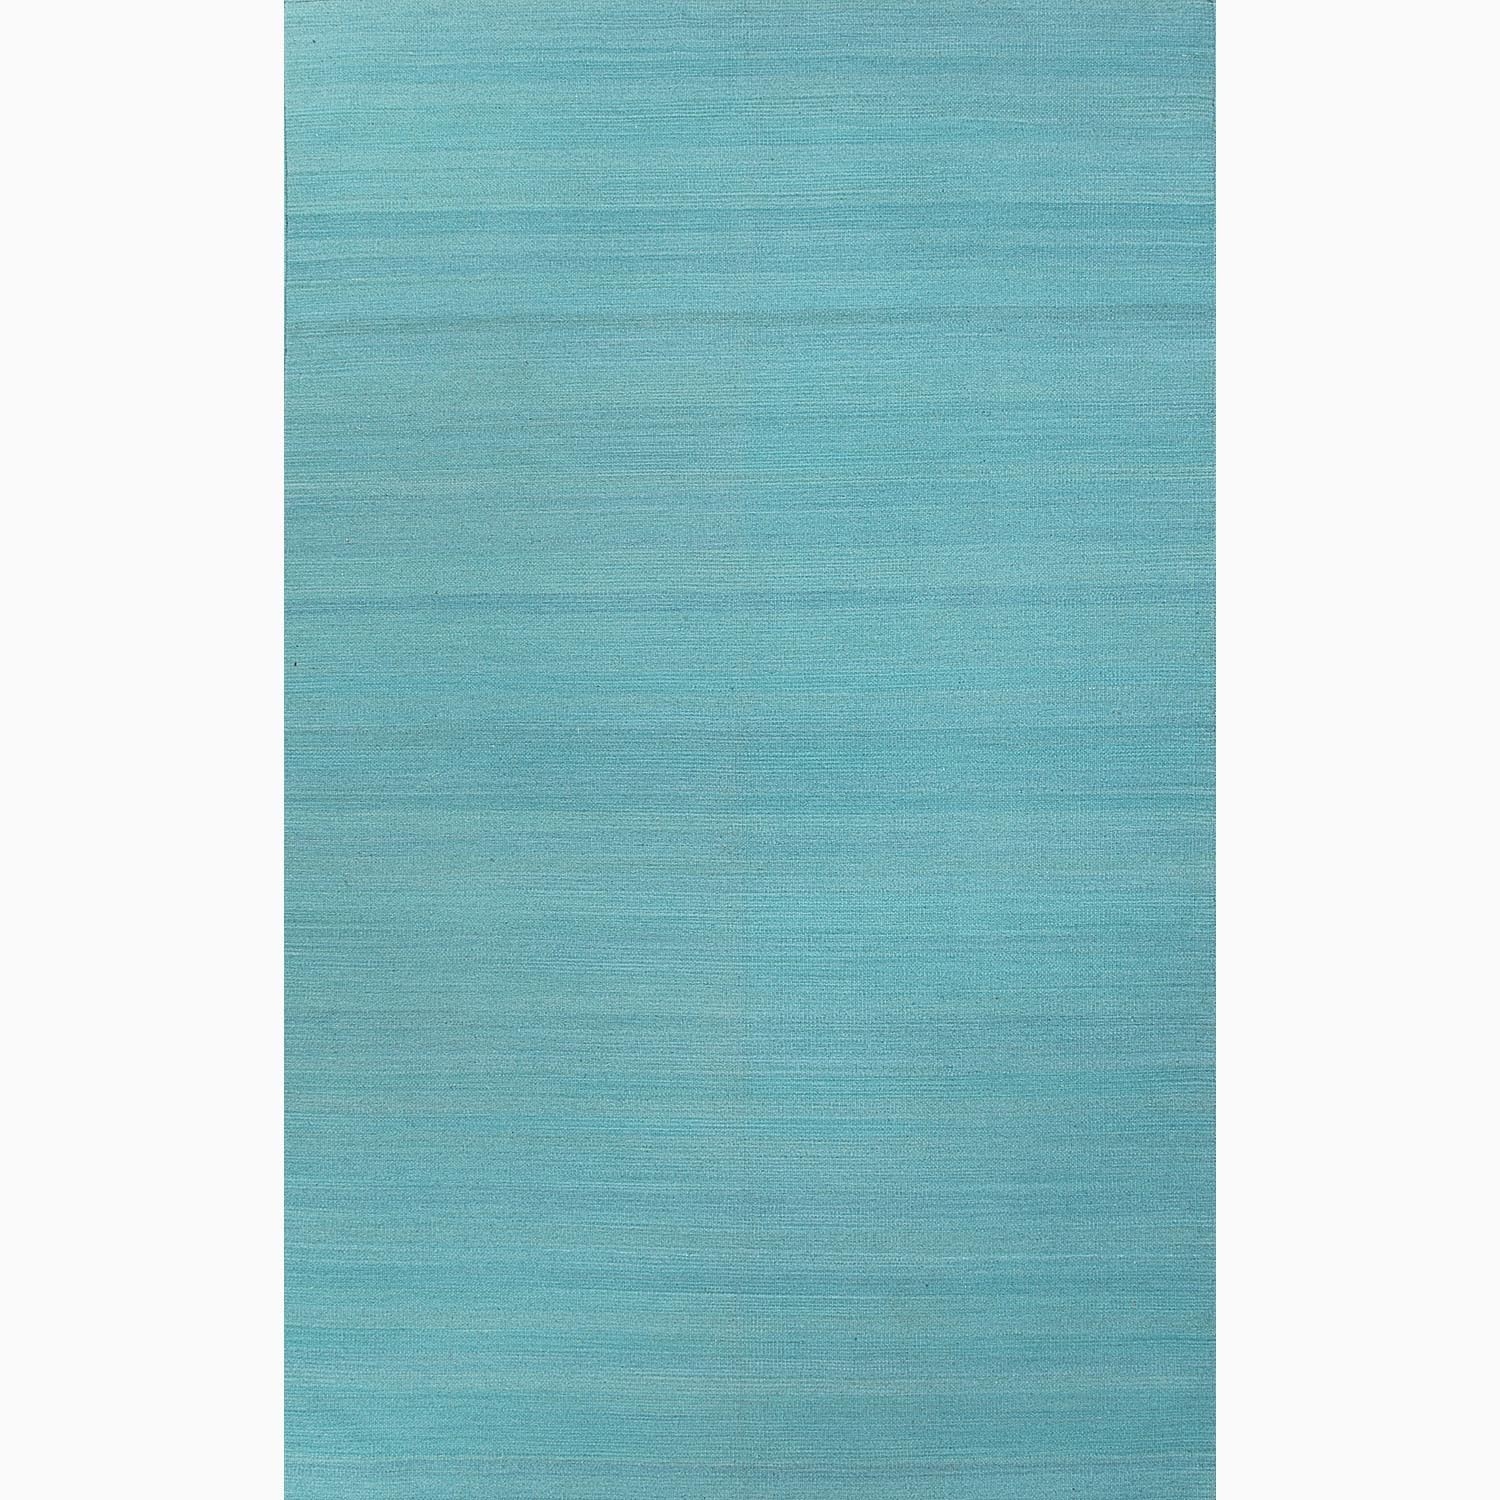 Hand made Solid Pattern Blue Wool Rug (8x10)